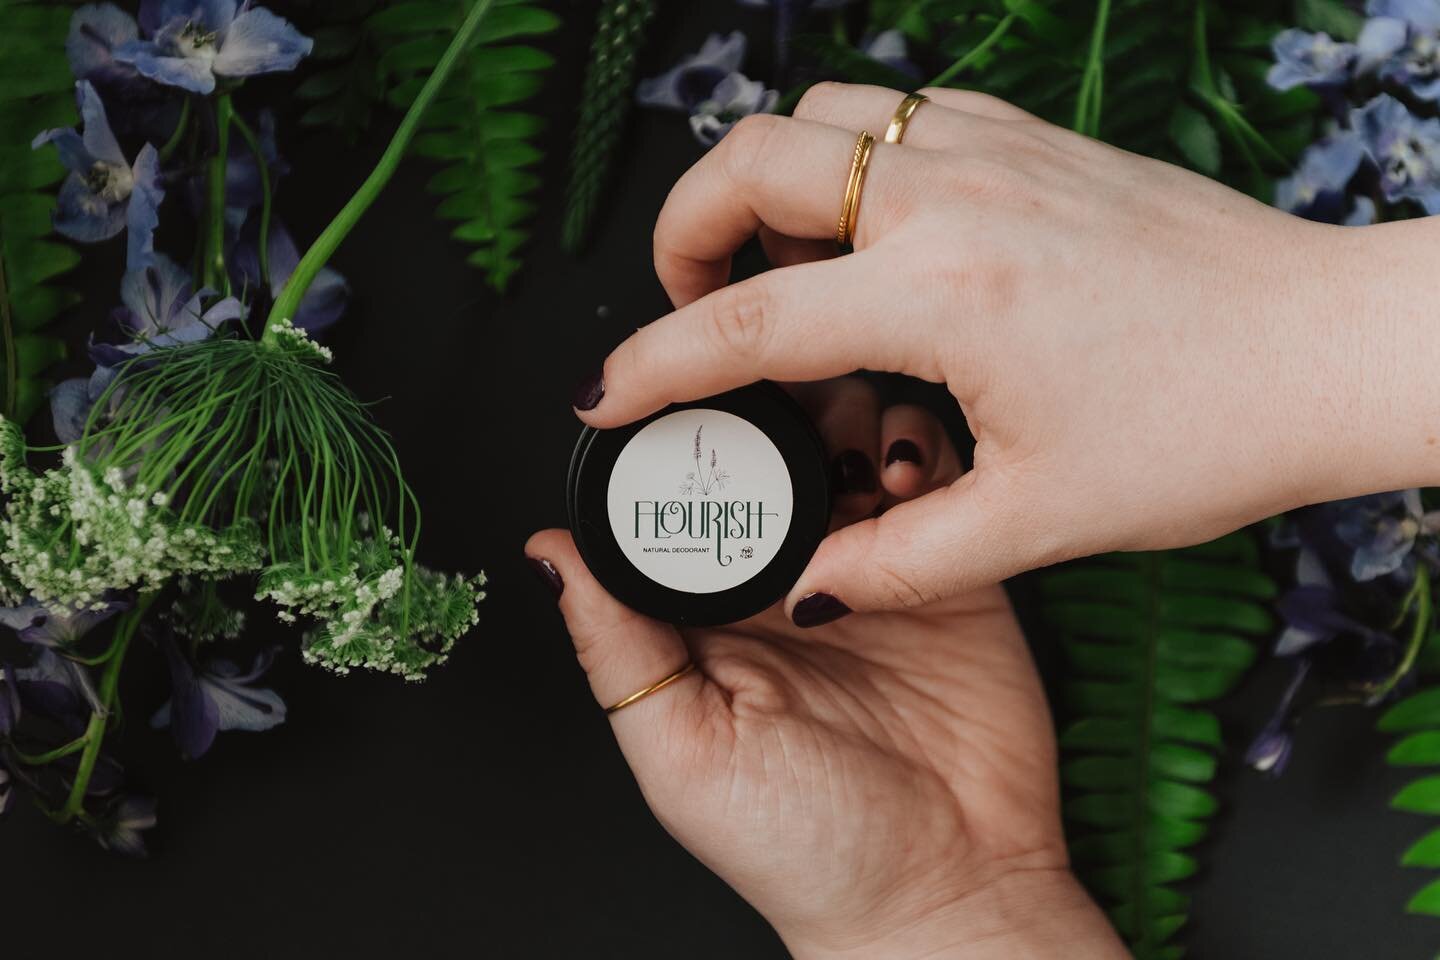 Trying out some product photography on my friend&rsquo;s new natural deodorant! Also shoutout to @katlarreaphoto for being my hand model.